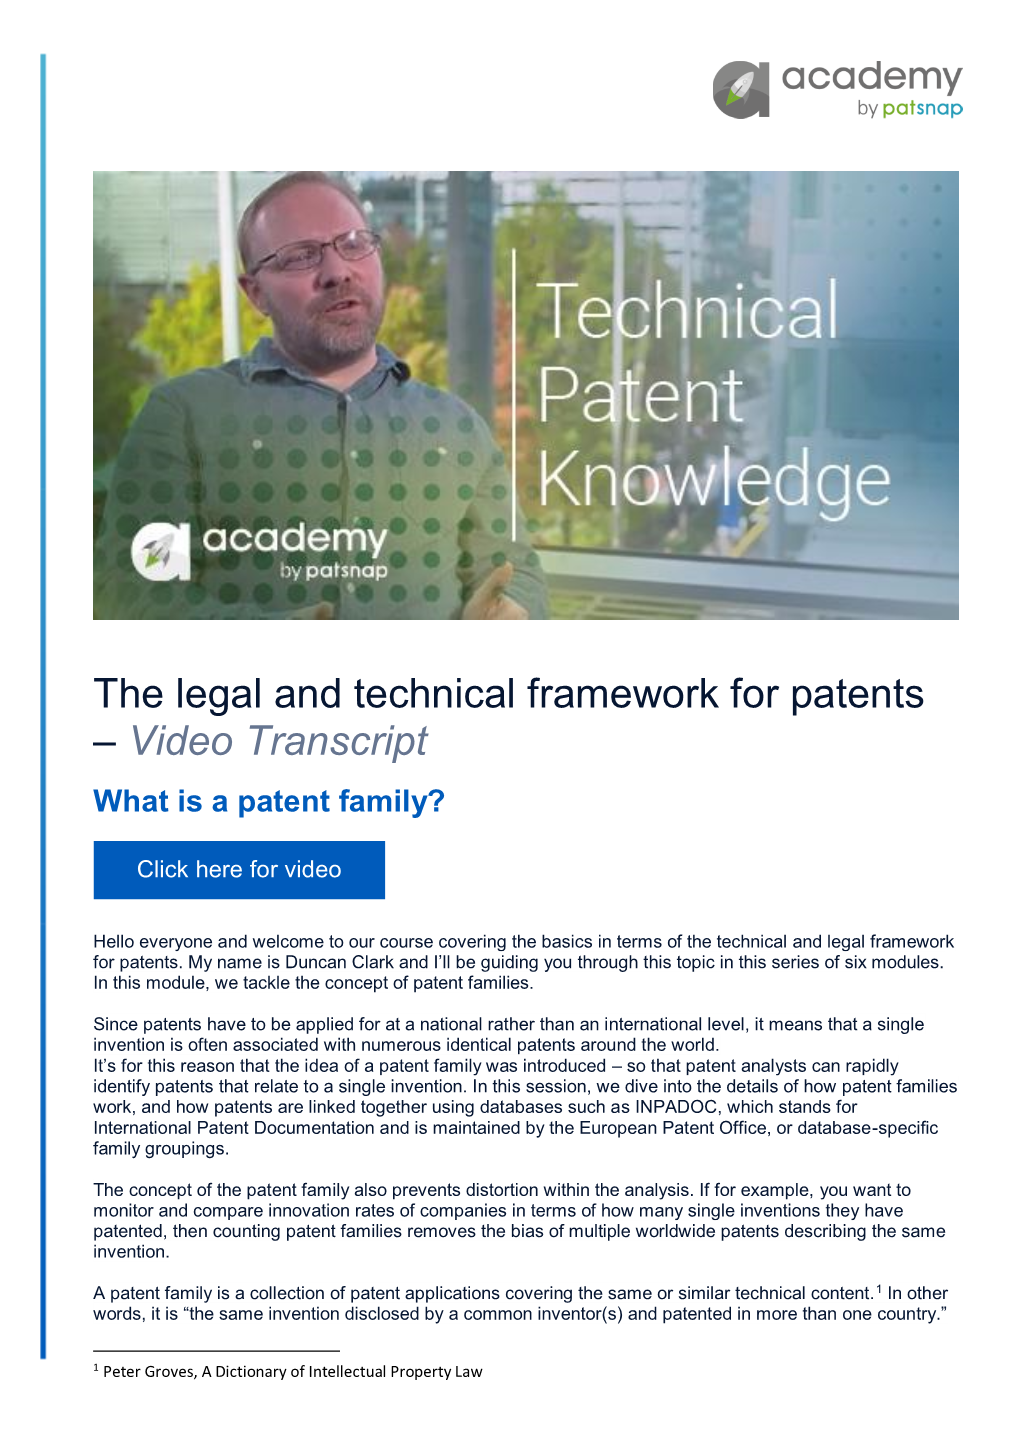 The Legal and Technical Framework for Patents – Video Transcript